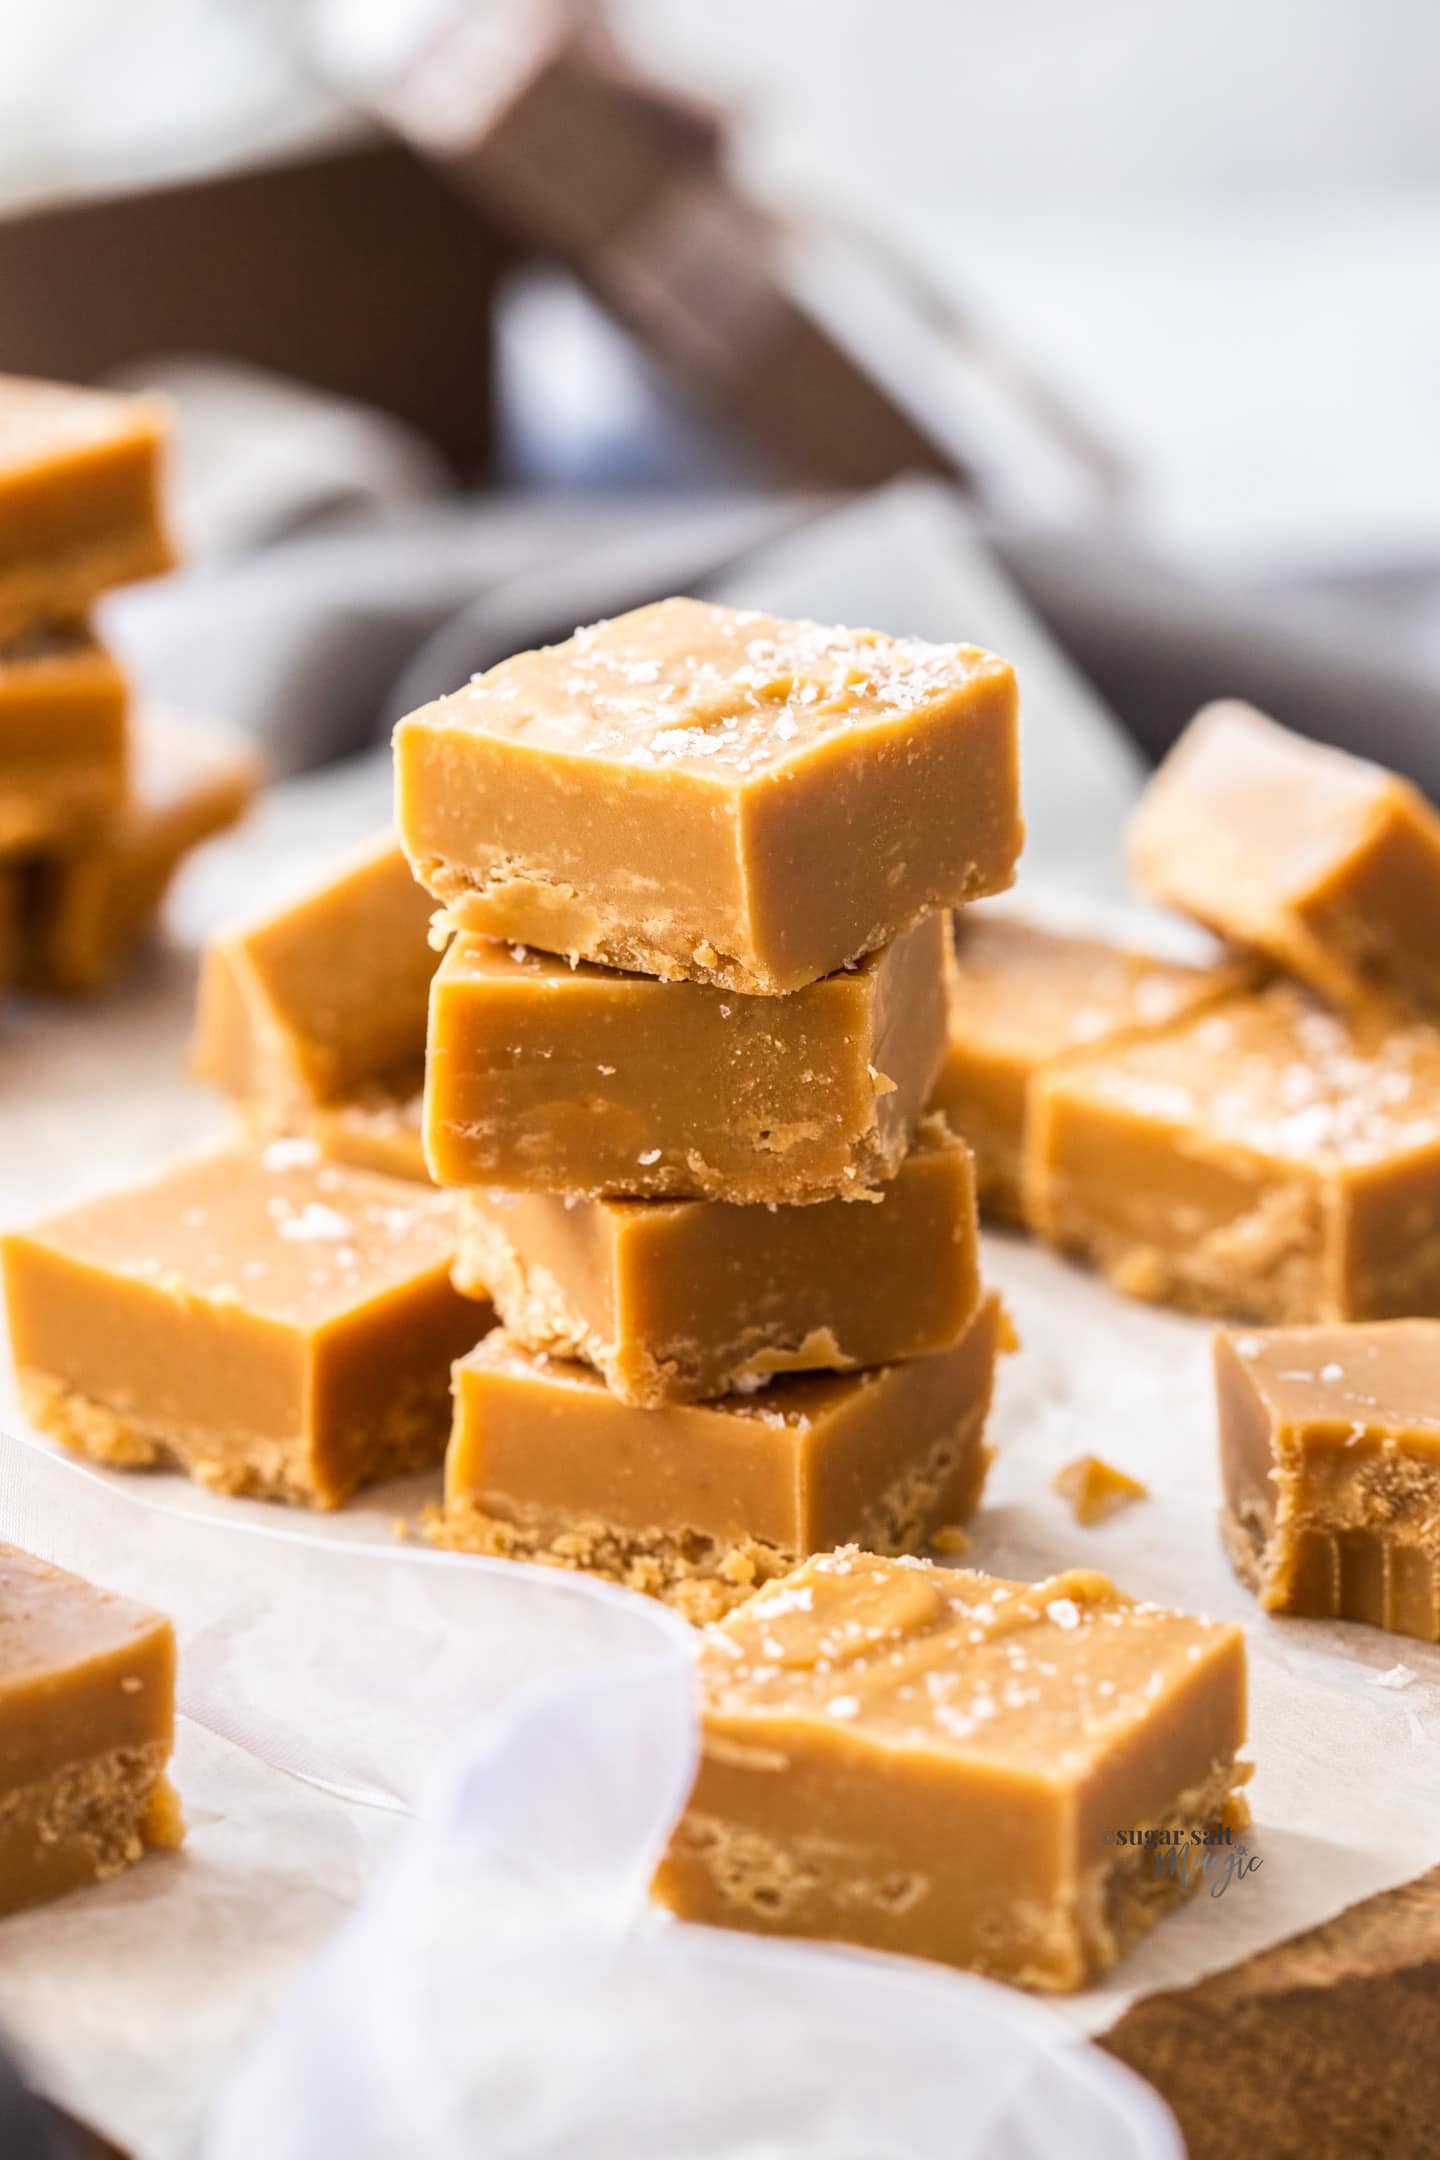 A stack of 4 pieces of caramel fudge.